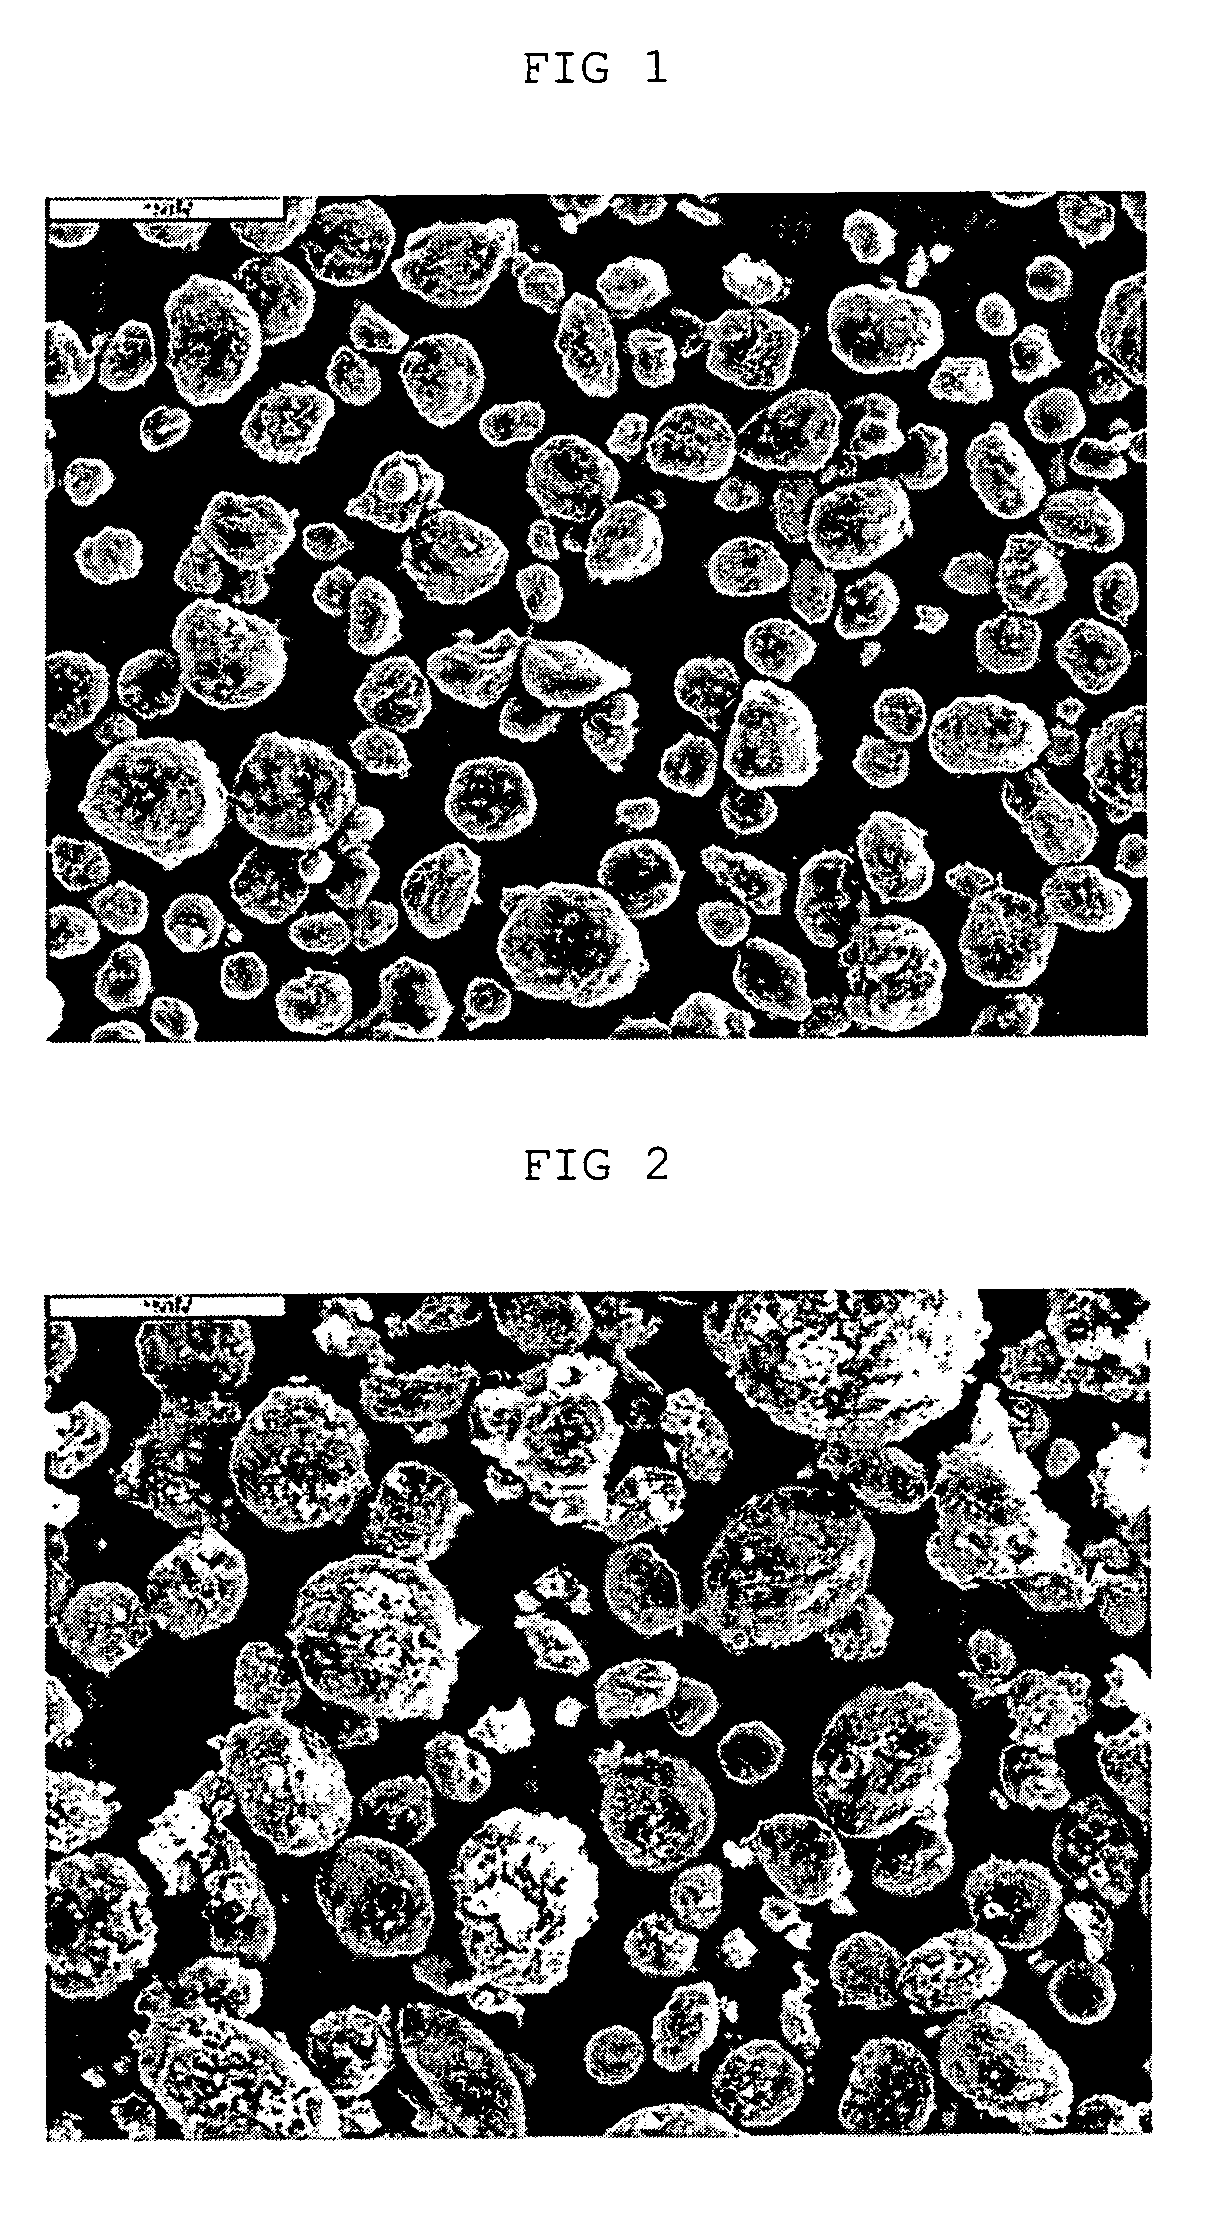 Anode active material with improved electrochemical properties and electrochemical device comprising the same